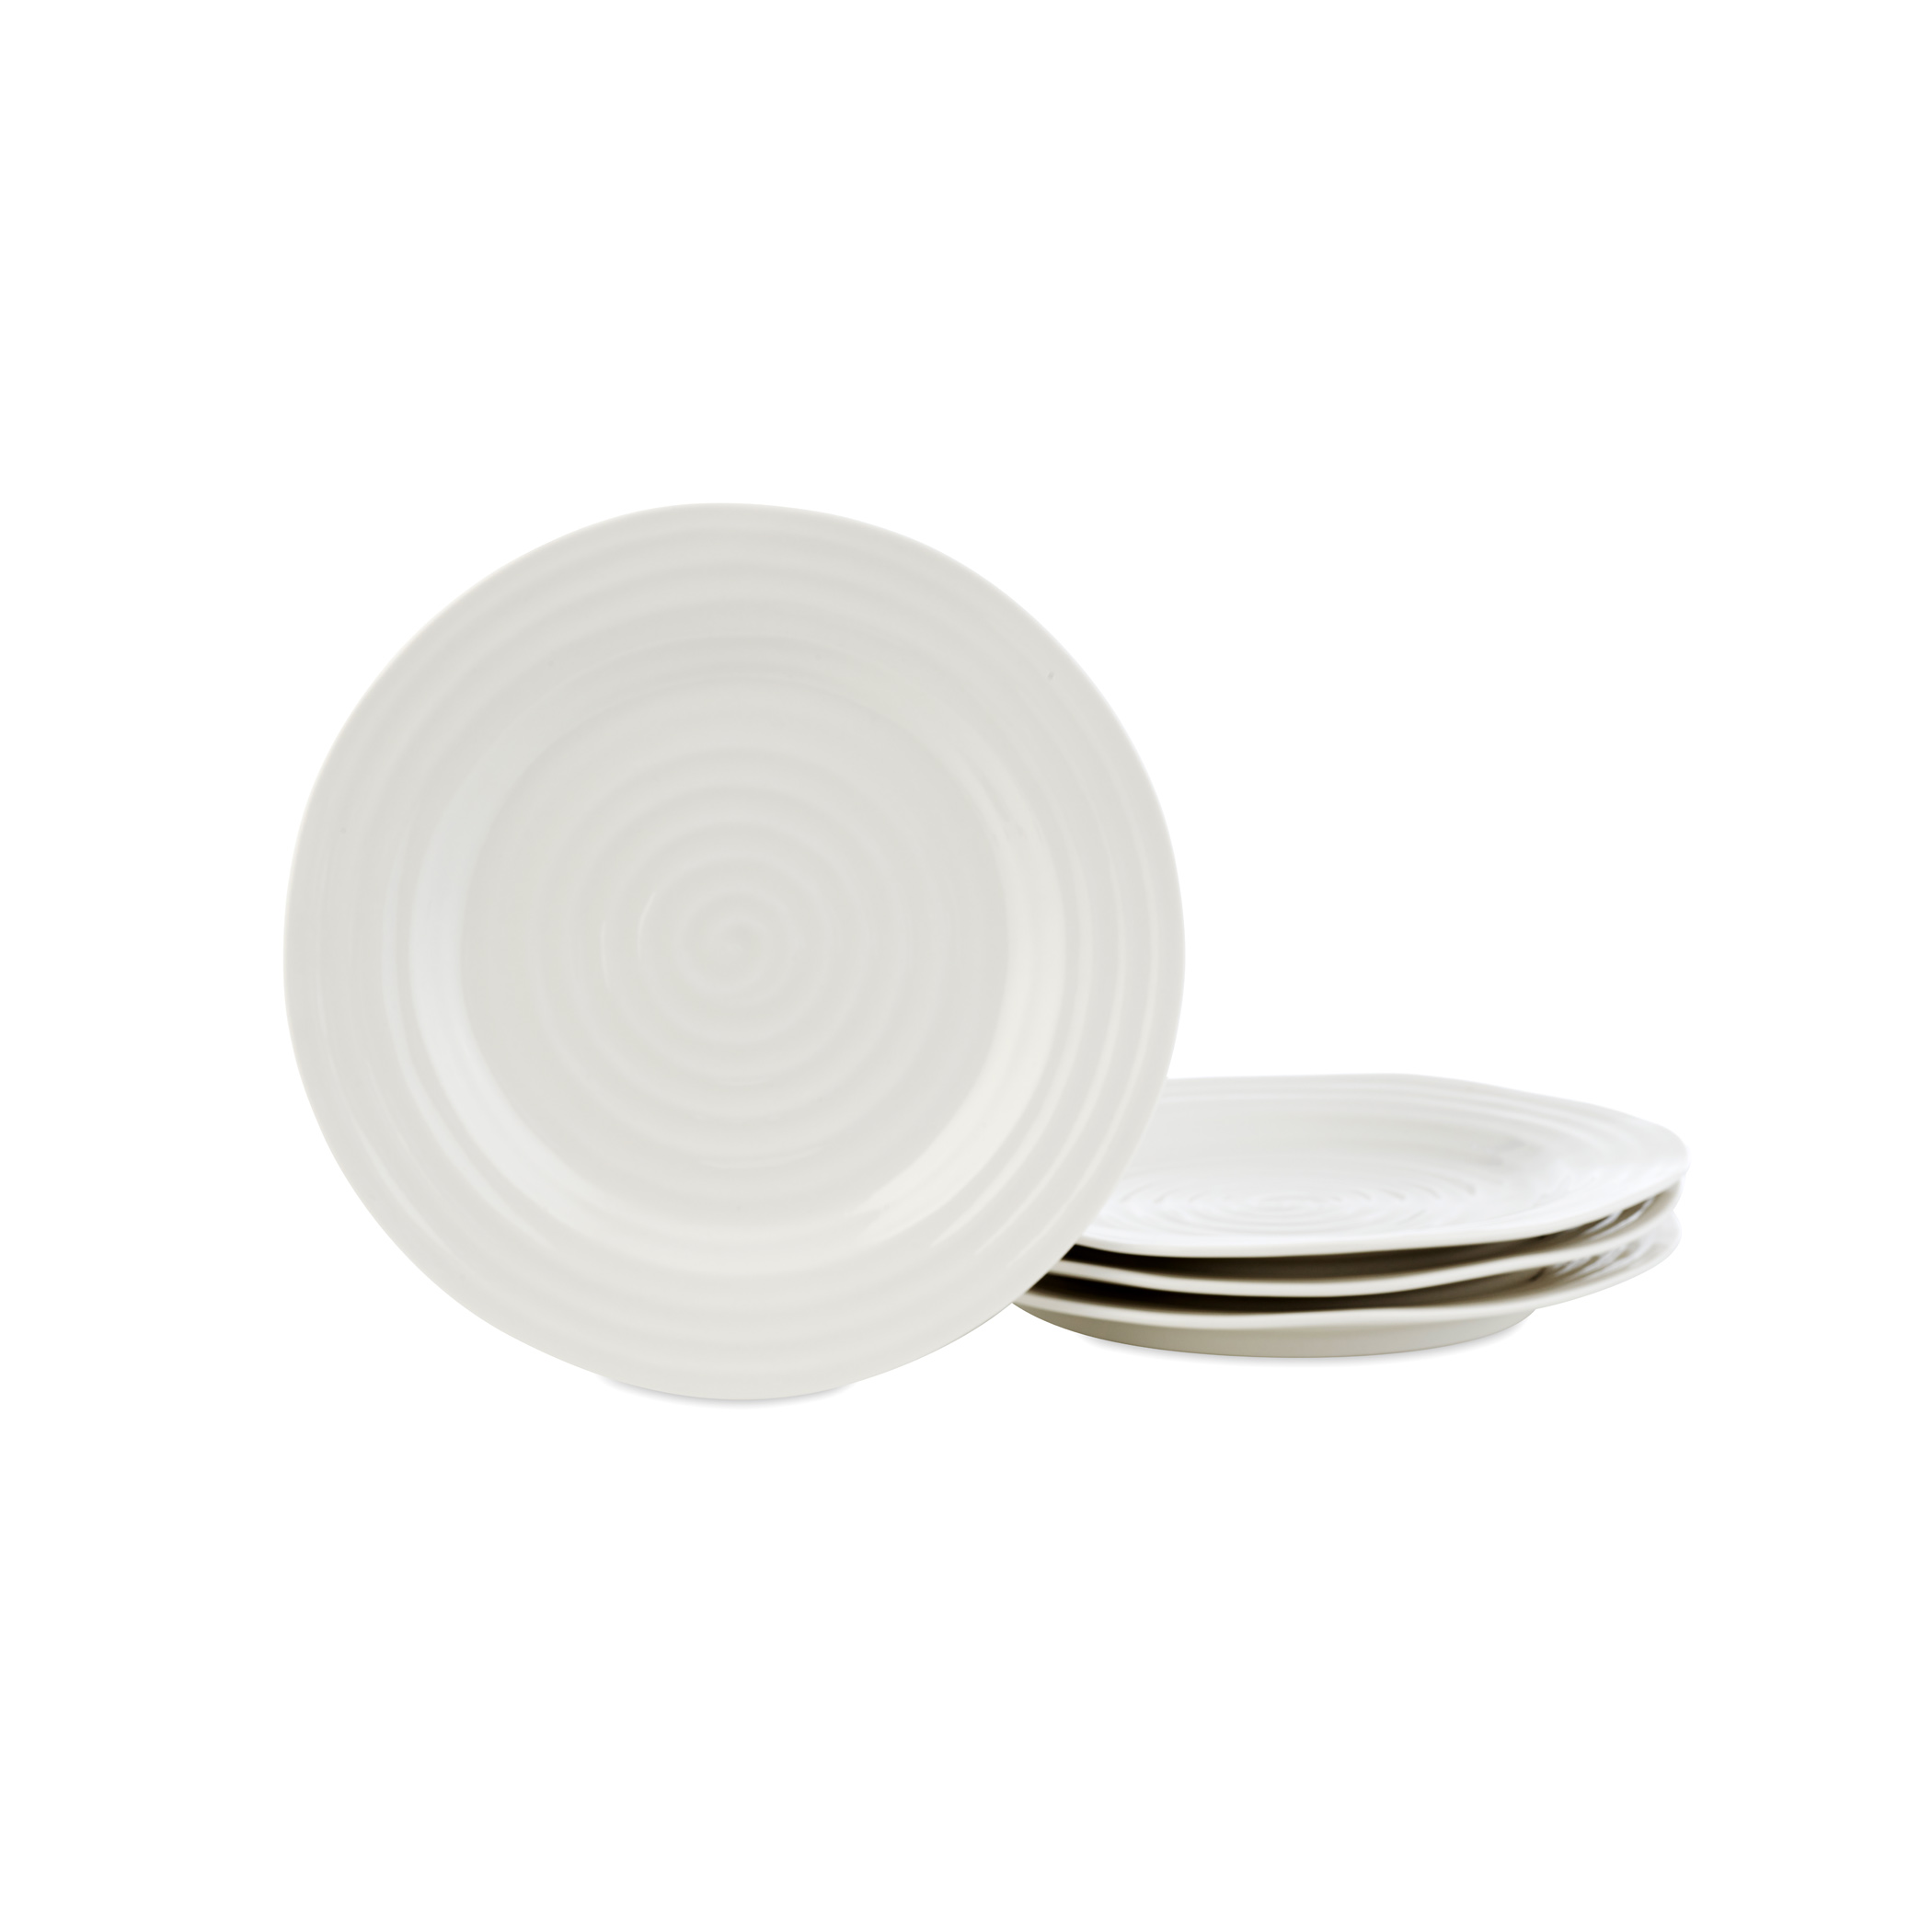 Sophie Conran Set of 4 Plates, White image number null